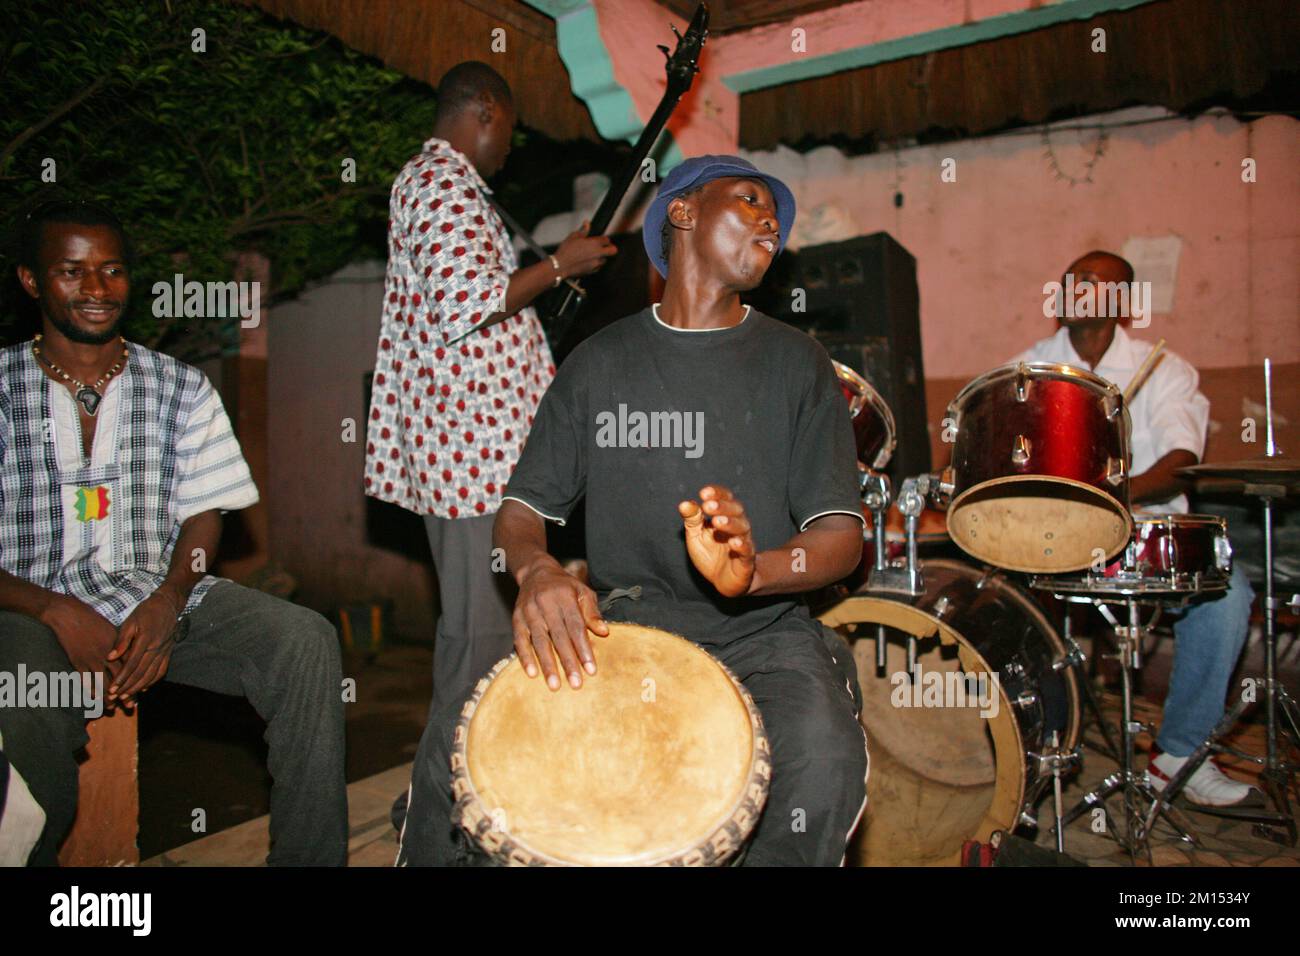 Mali's capital, has a rich musical scene with clubs and nightlife . In Bamako, there are some amazing clubs with life music in Bamako ,Mali,Africa. Stock Photo